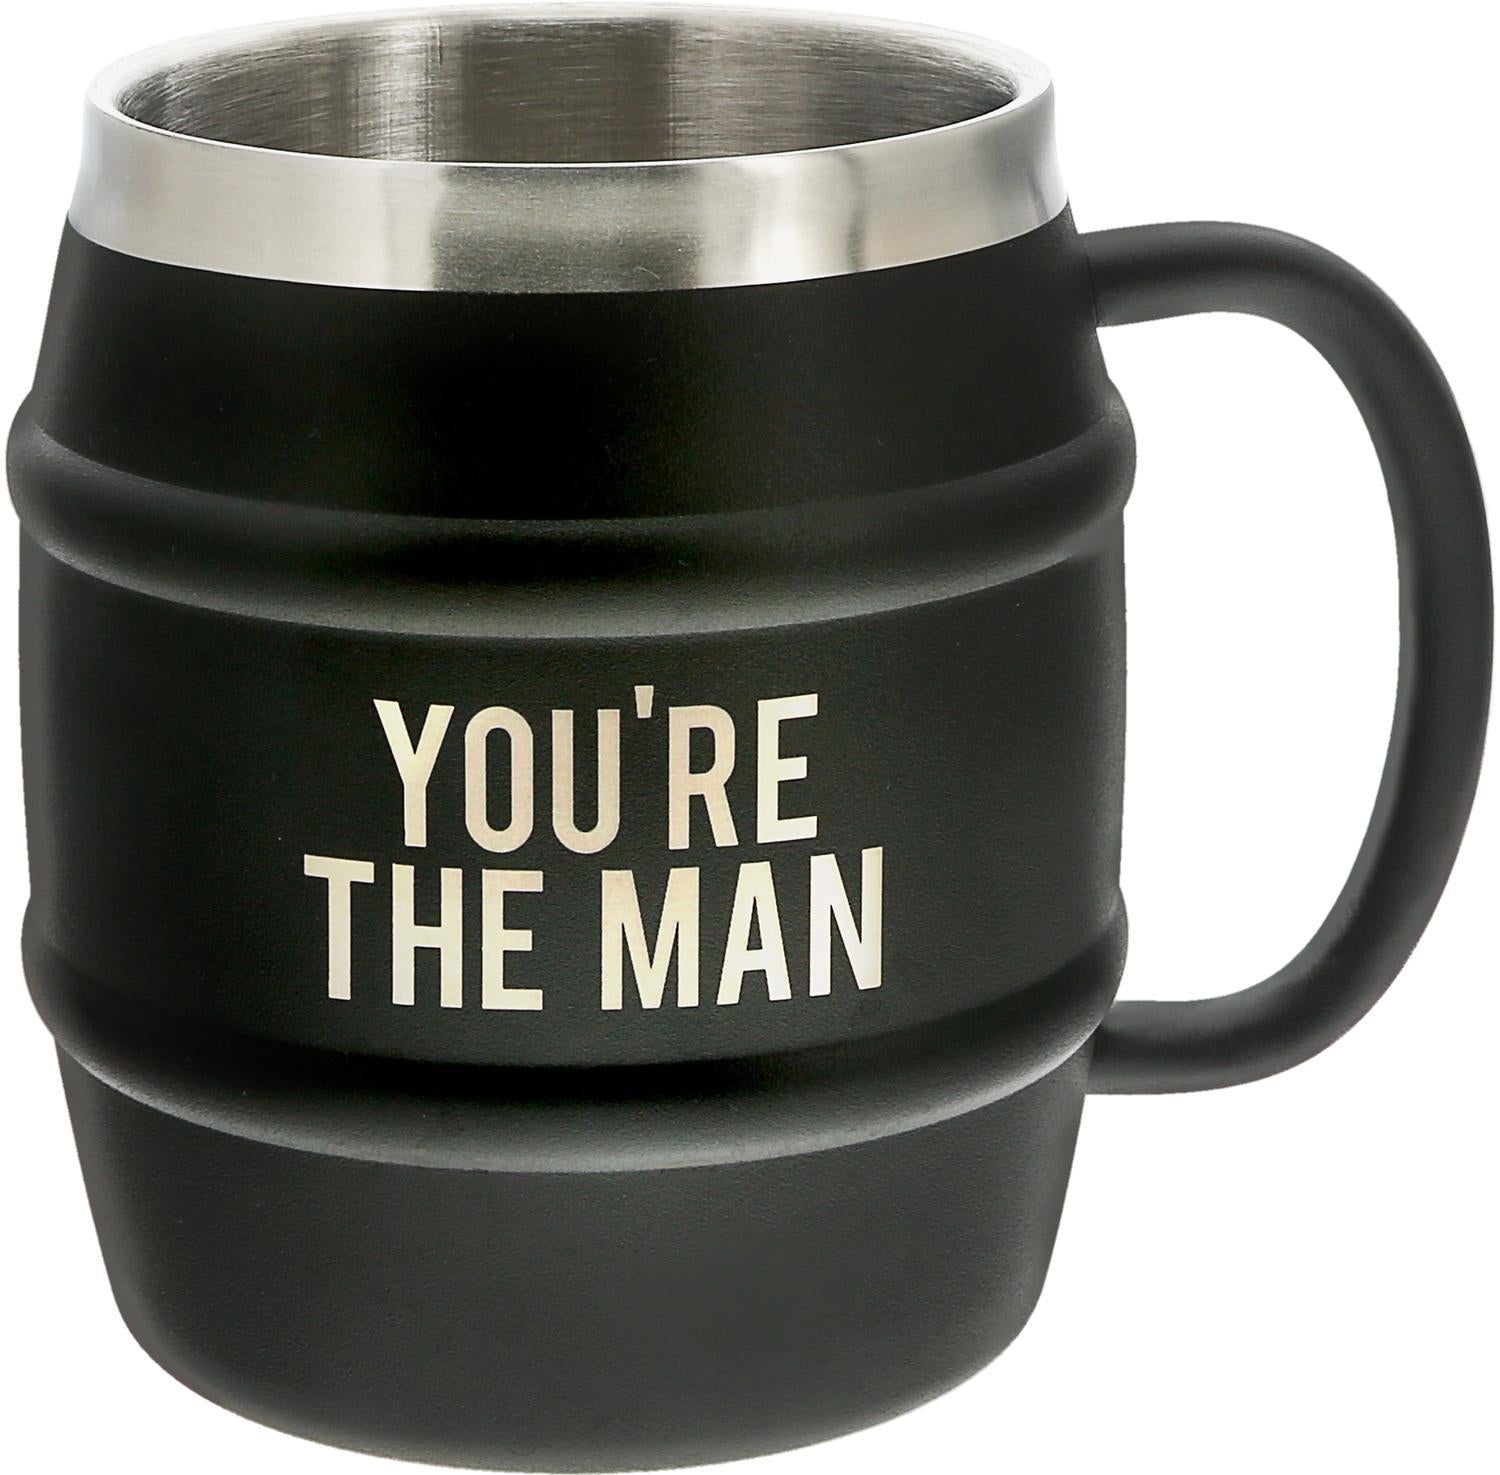 The Man - 15 oz. Stainless Steel Double Wall Stein